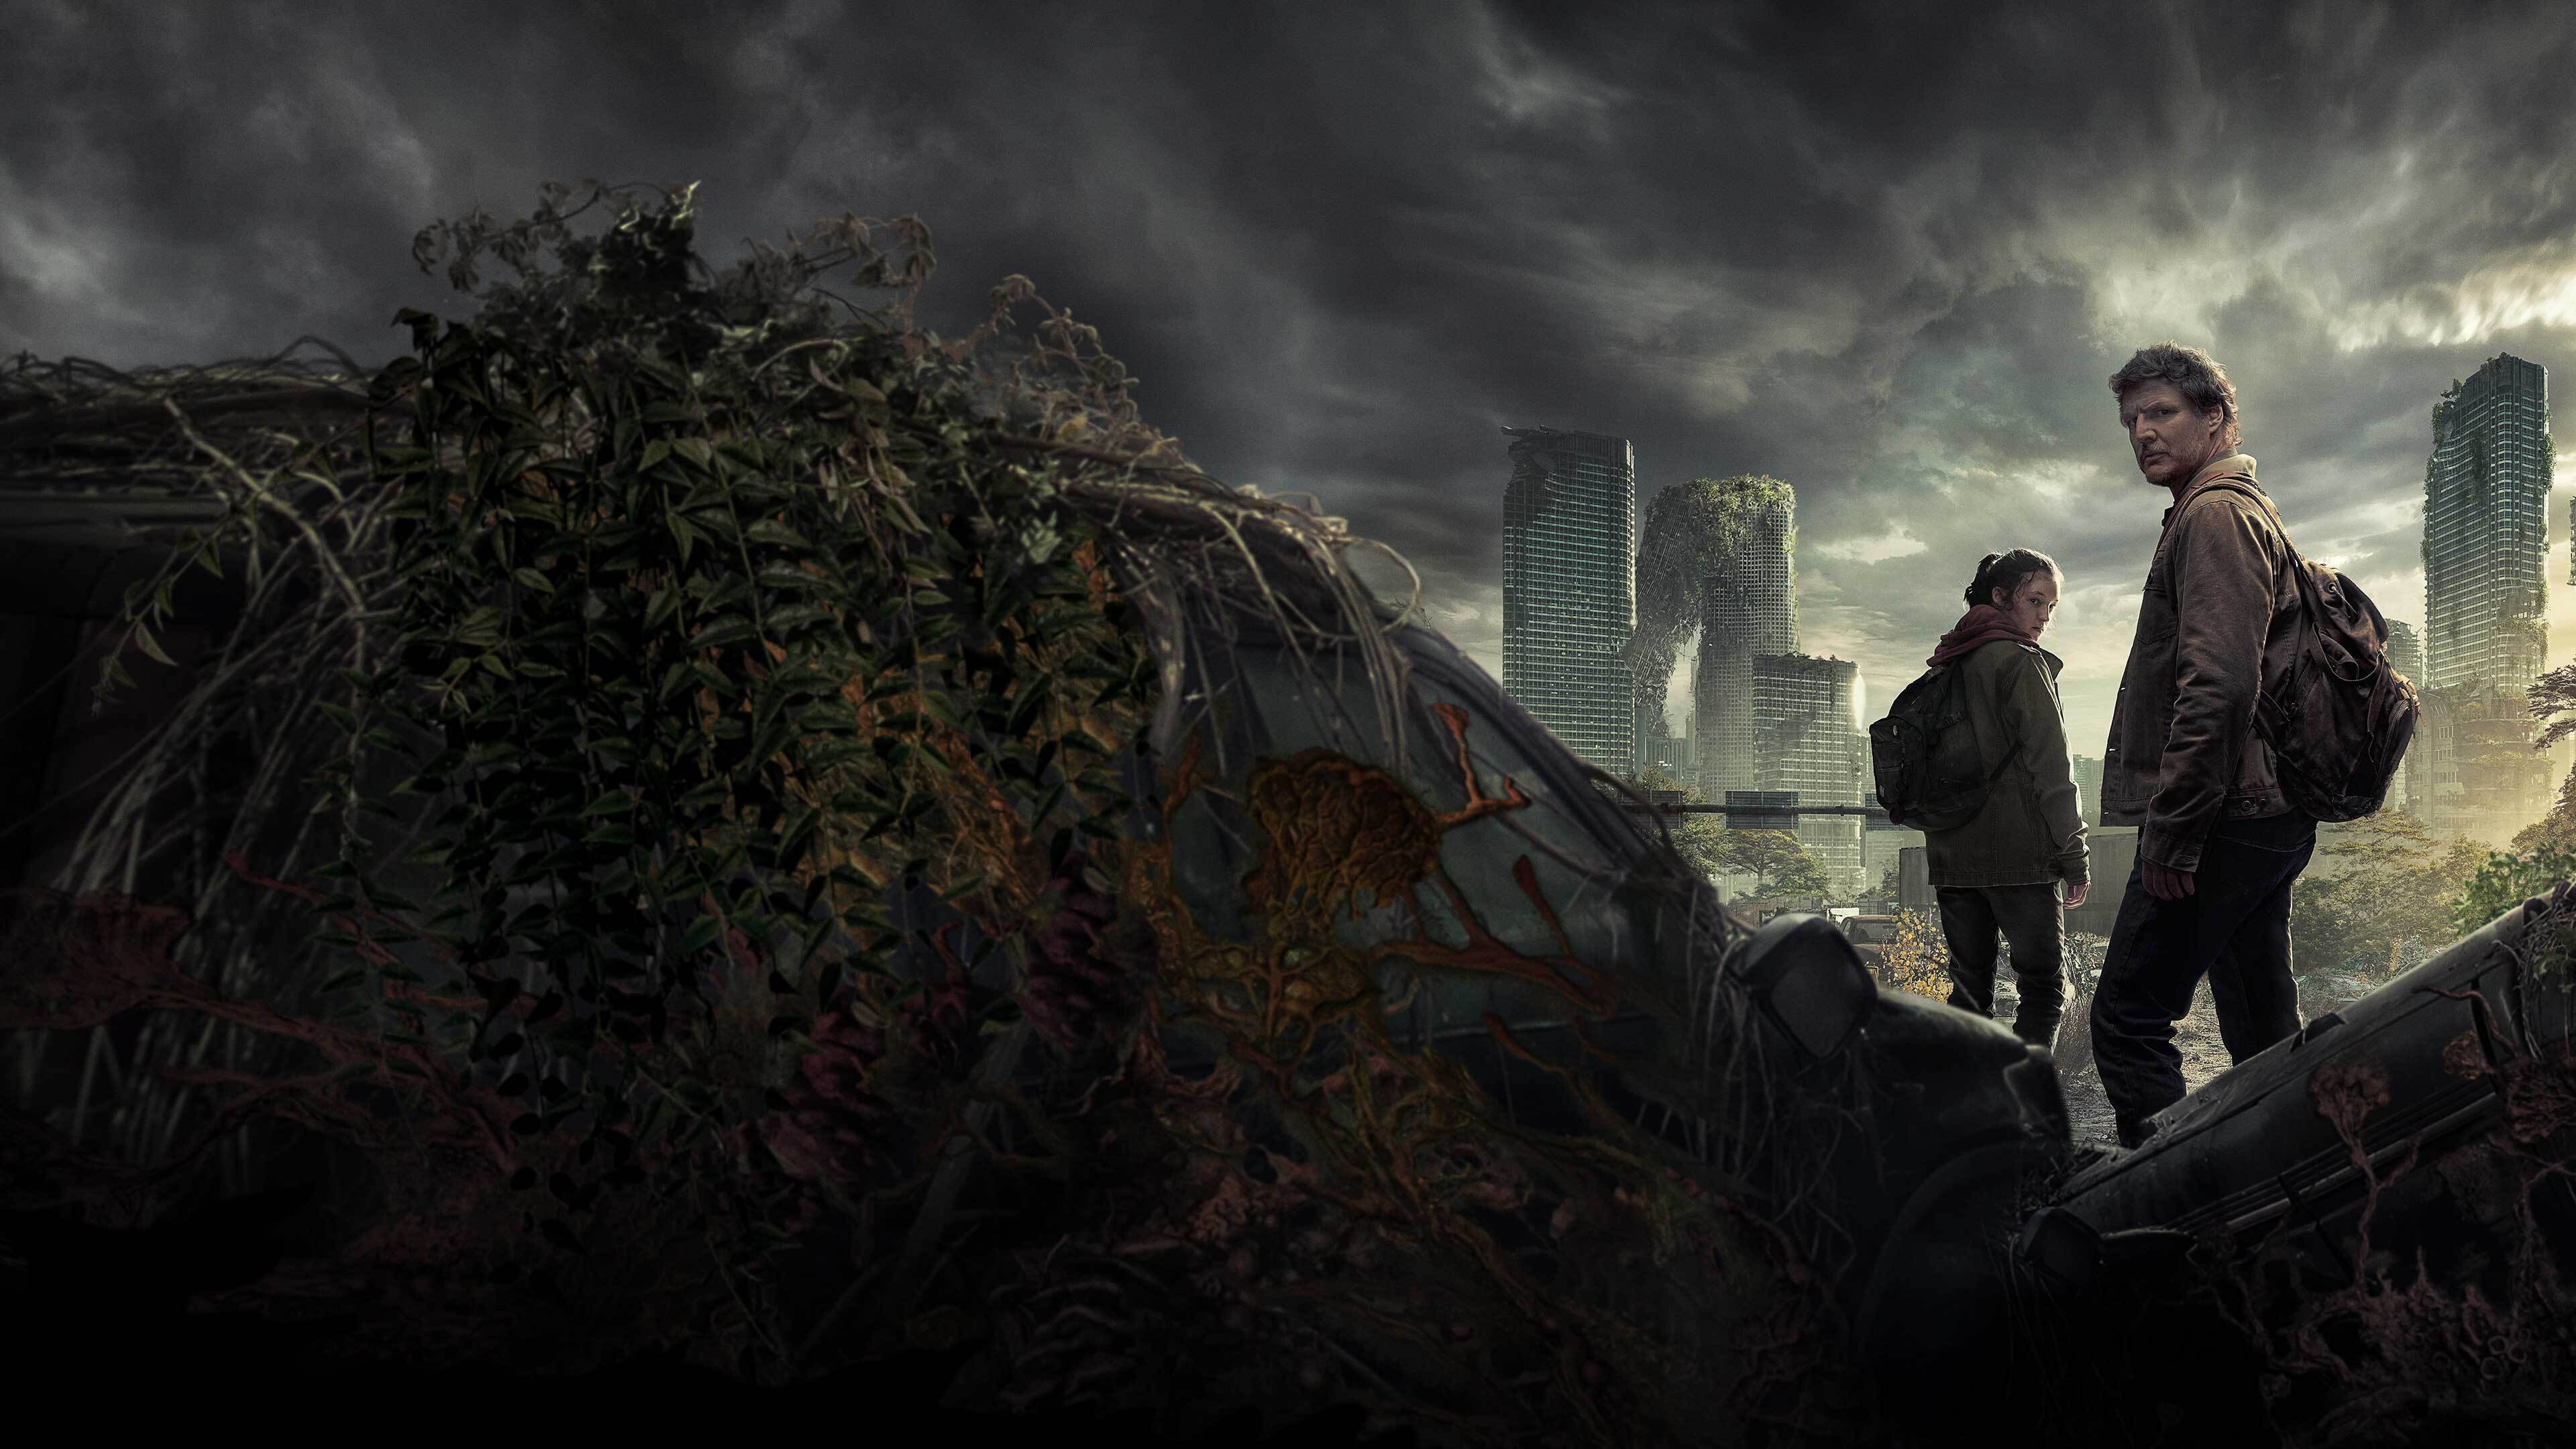 HBO’s The Last of Us is a dystopian thriller based on a popular video game